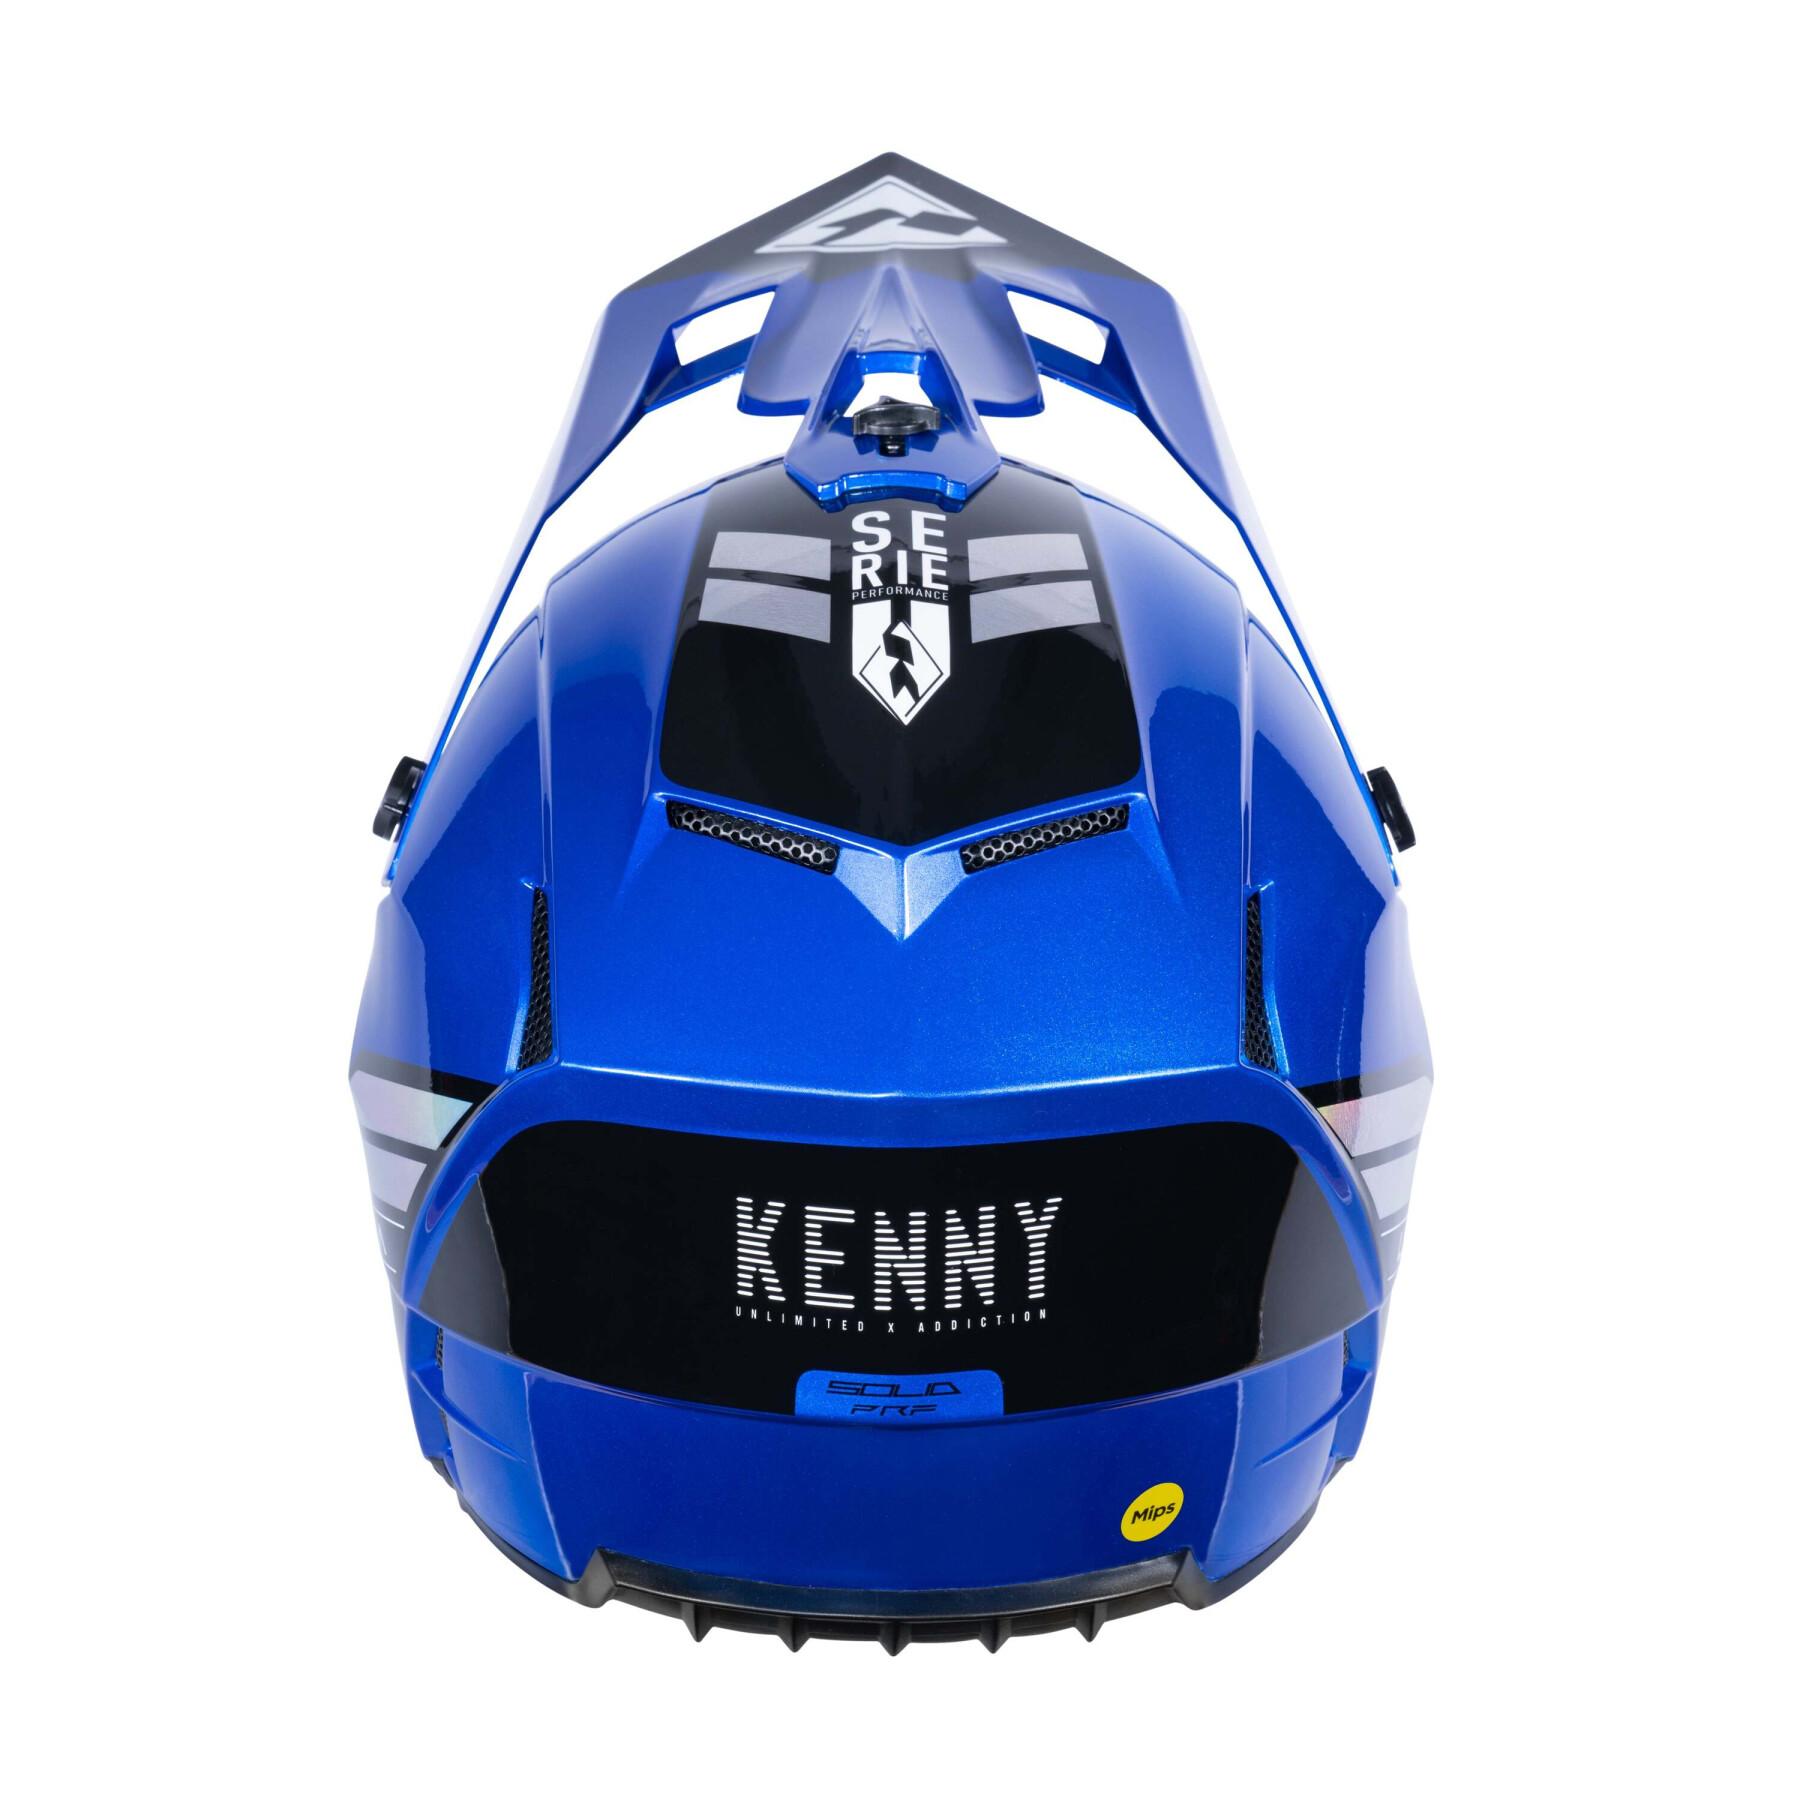 Casque moto cross Kenny Performance Solid